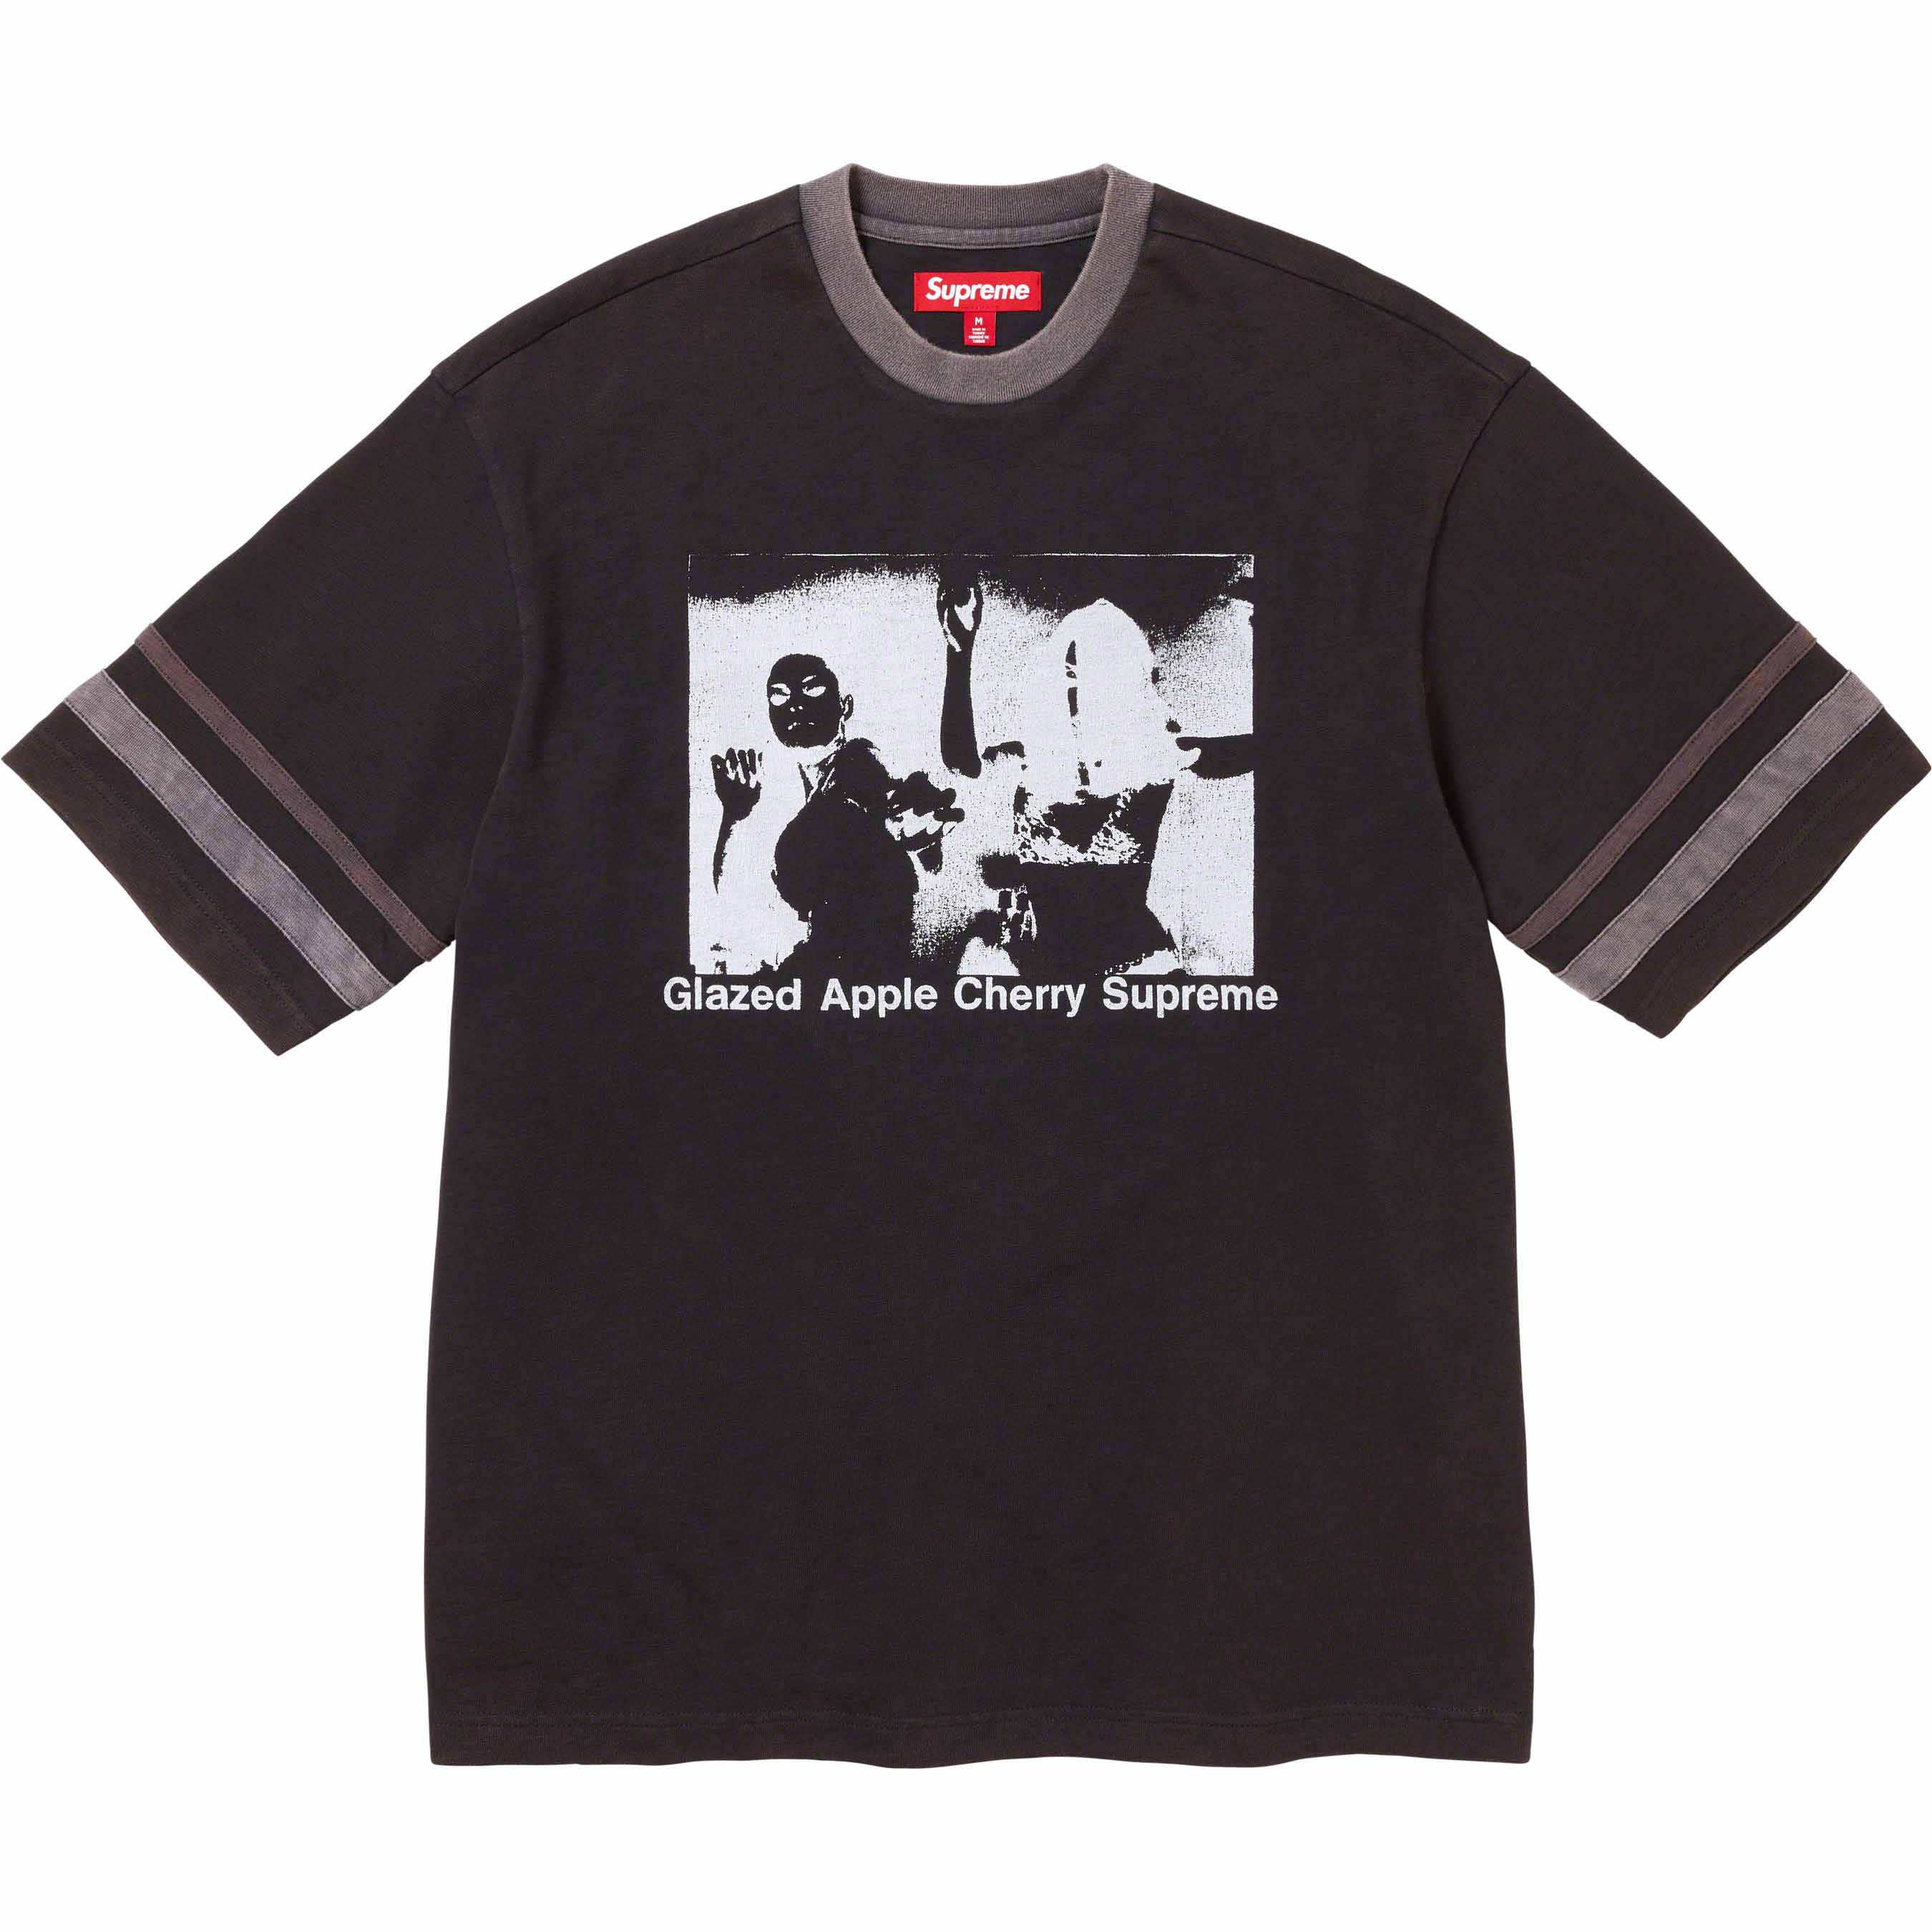 SS19 Supreme Athletic Label Tee Tシャツ